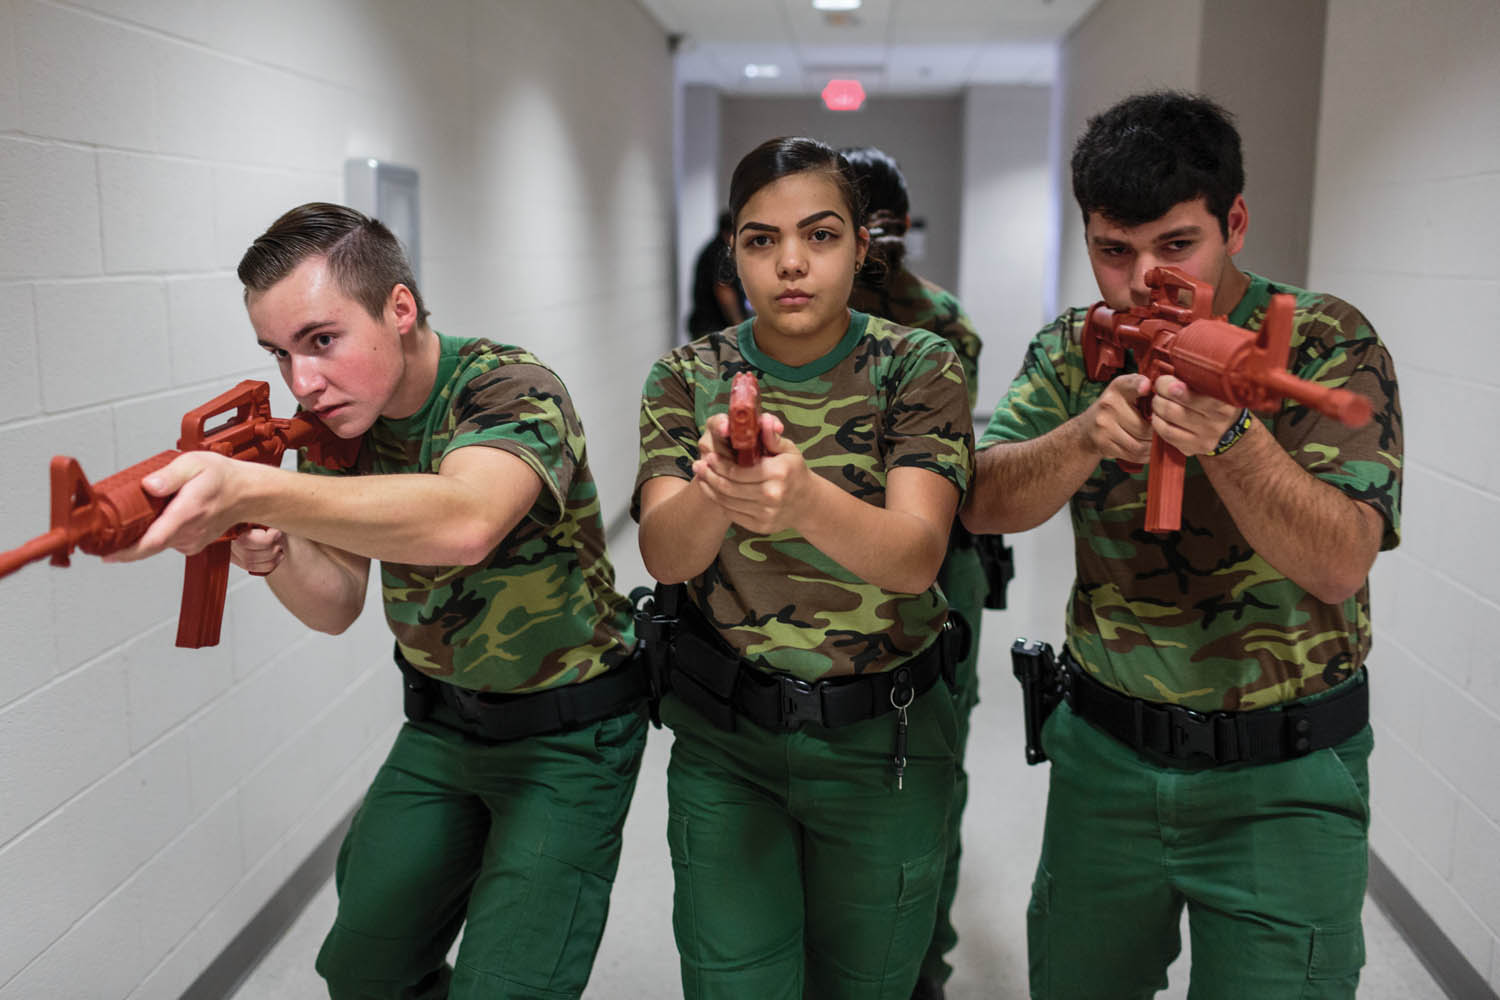 Ryan Dunlavy (left), Nerisa Garcia (center), and Jeremy Cabral (right), students from the Border Patrol Explorer Program, practice active-shooter scenarios and room clearing at the United States Border Patrol Station in Kingsville, TX. The Explorer program is a branch of the Boy Scouts of America and is sponsored by the US Department of Homeland Security. Photographed by Sarah Blesener